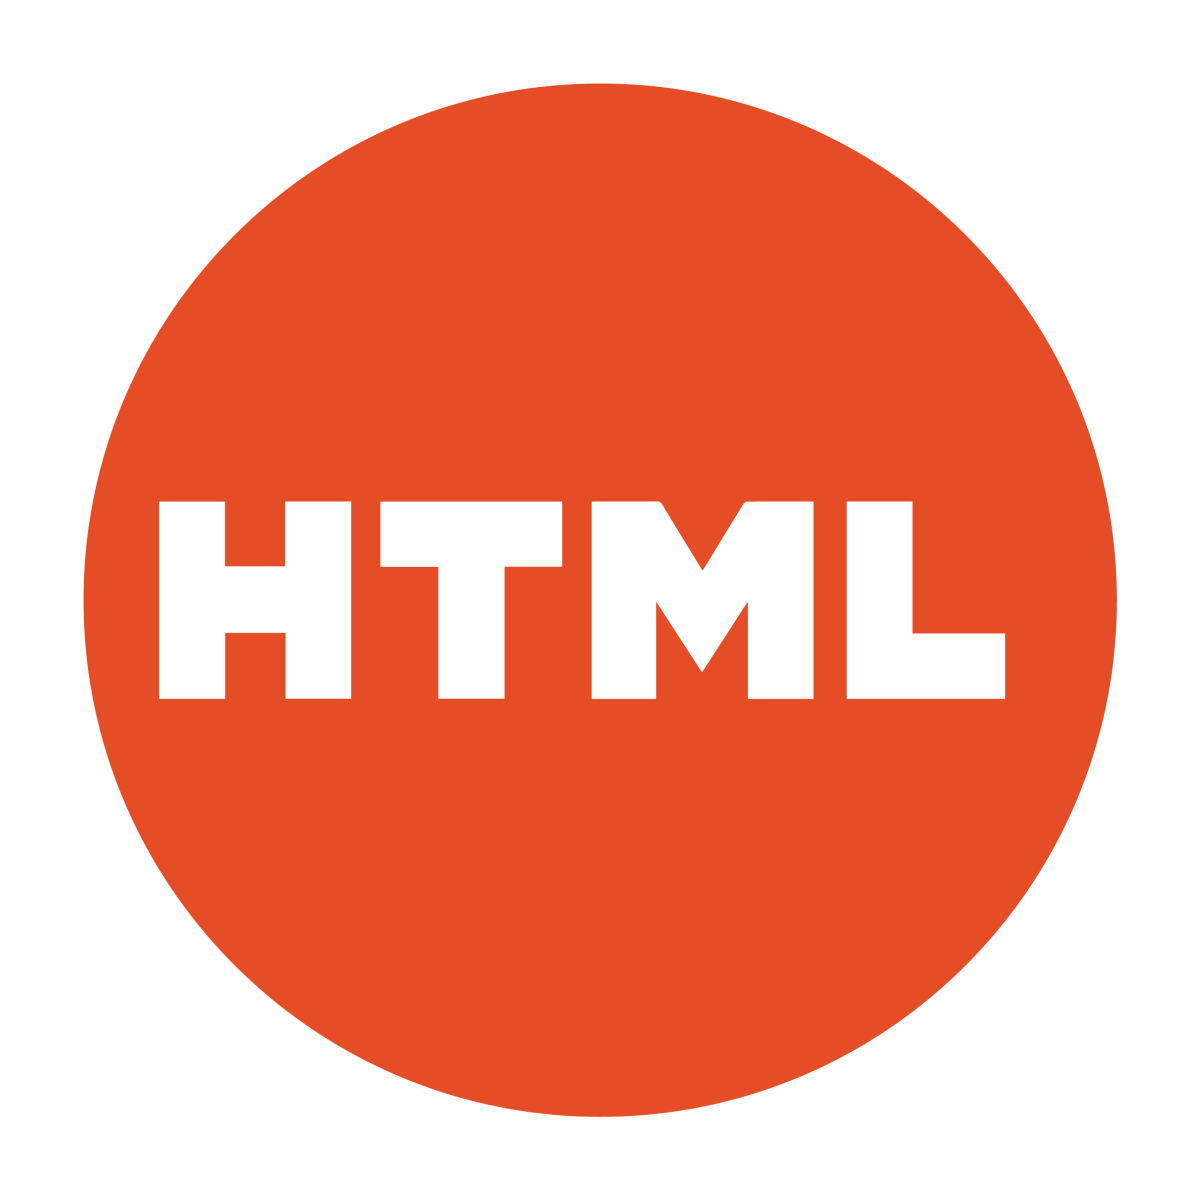 HTML Logo - Considering a Career in Web Development? Here's What You Need to Know